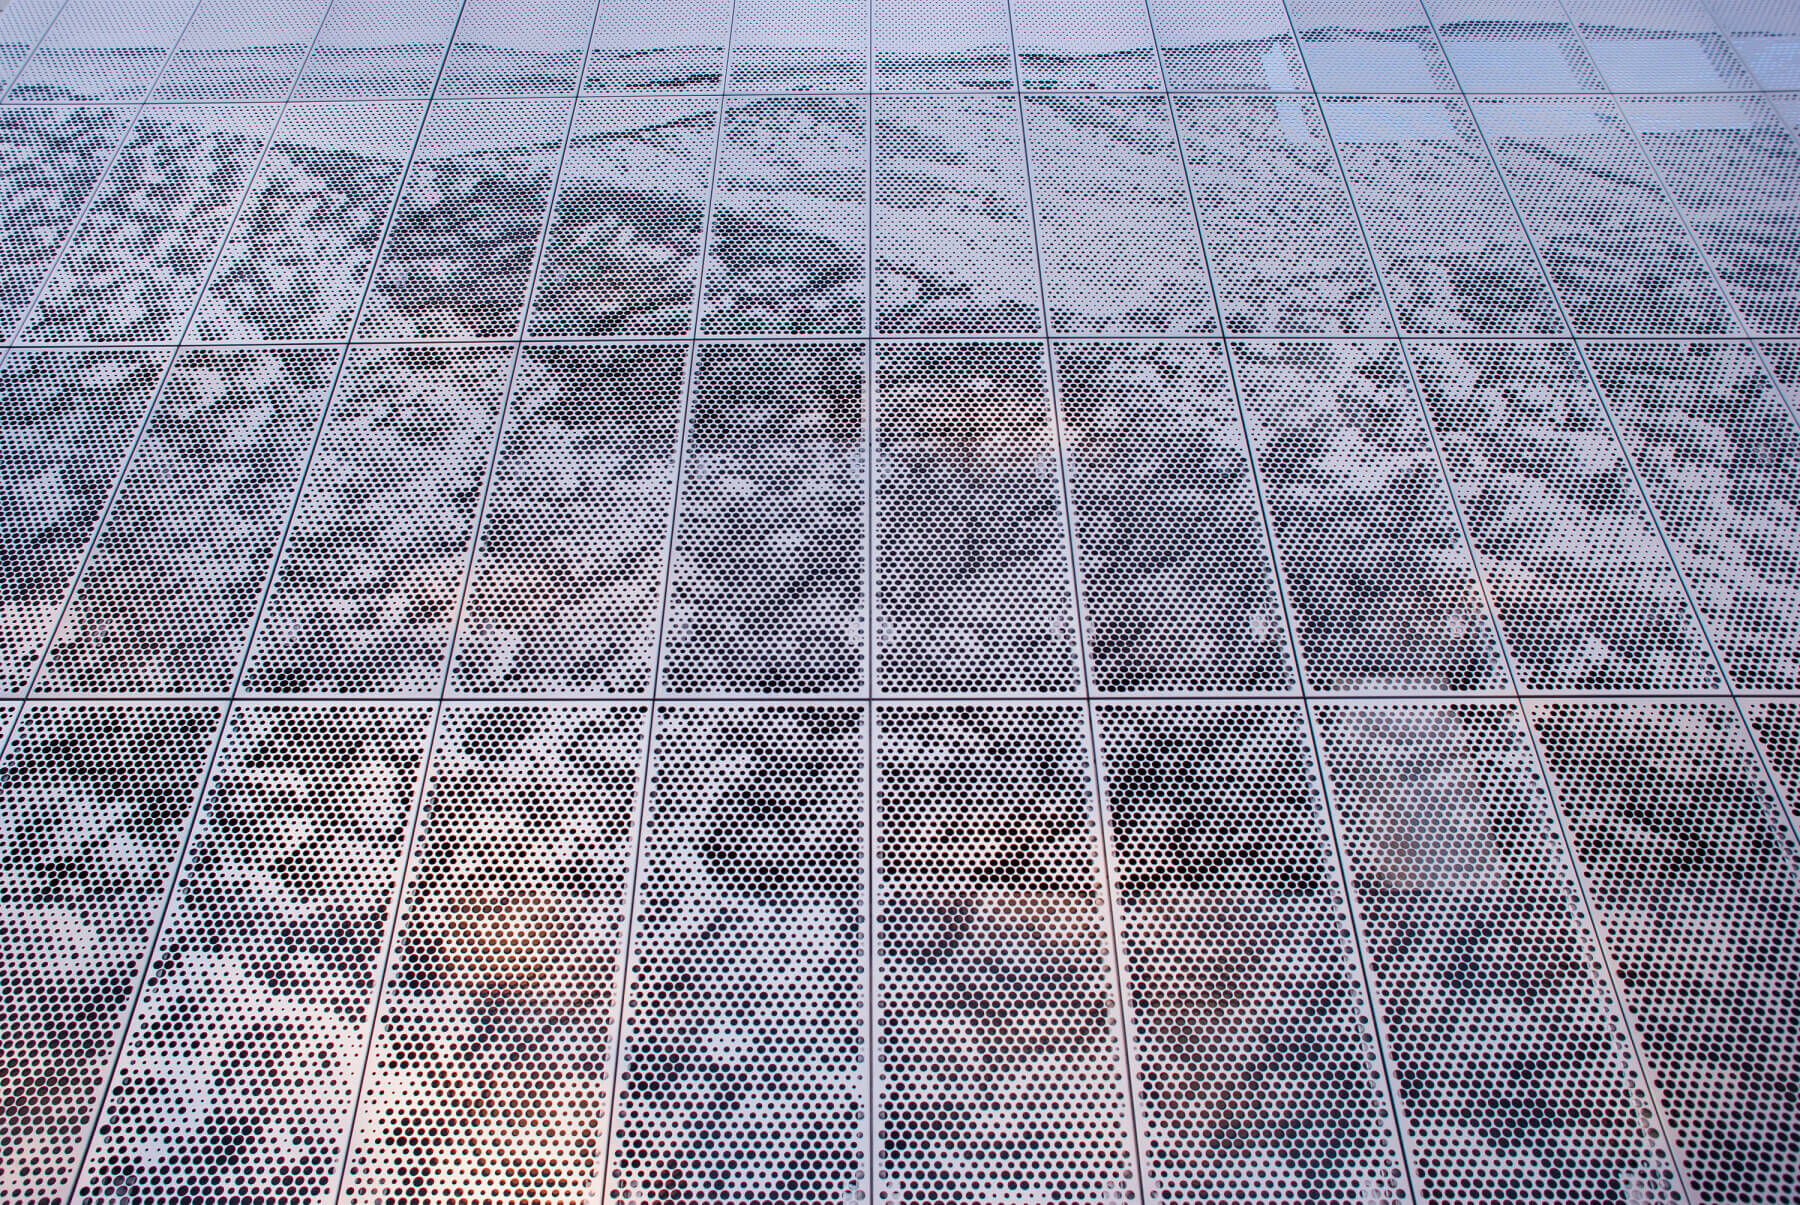 a close up of the perforated metal panel attached to the side of Asheville Regional Airport’s parking garage